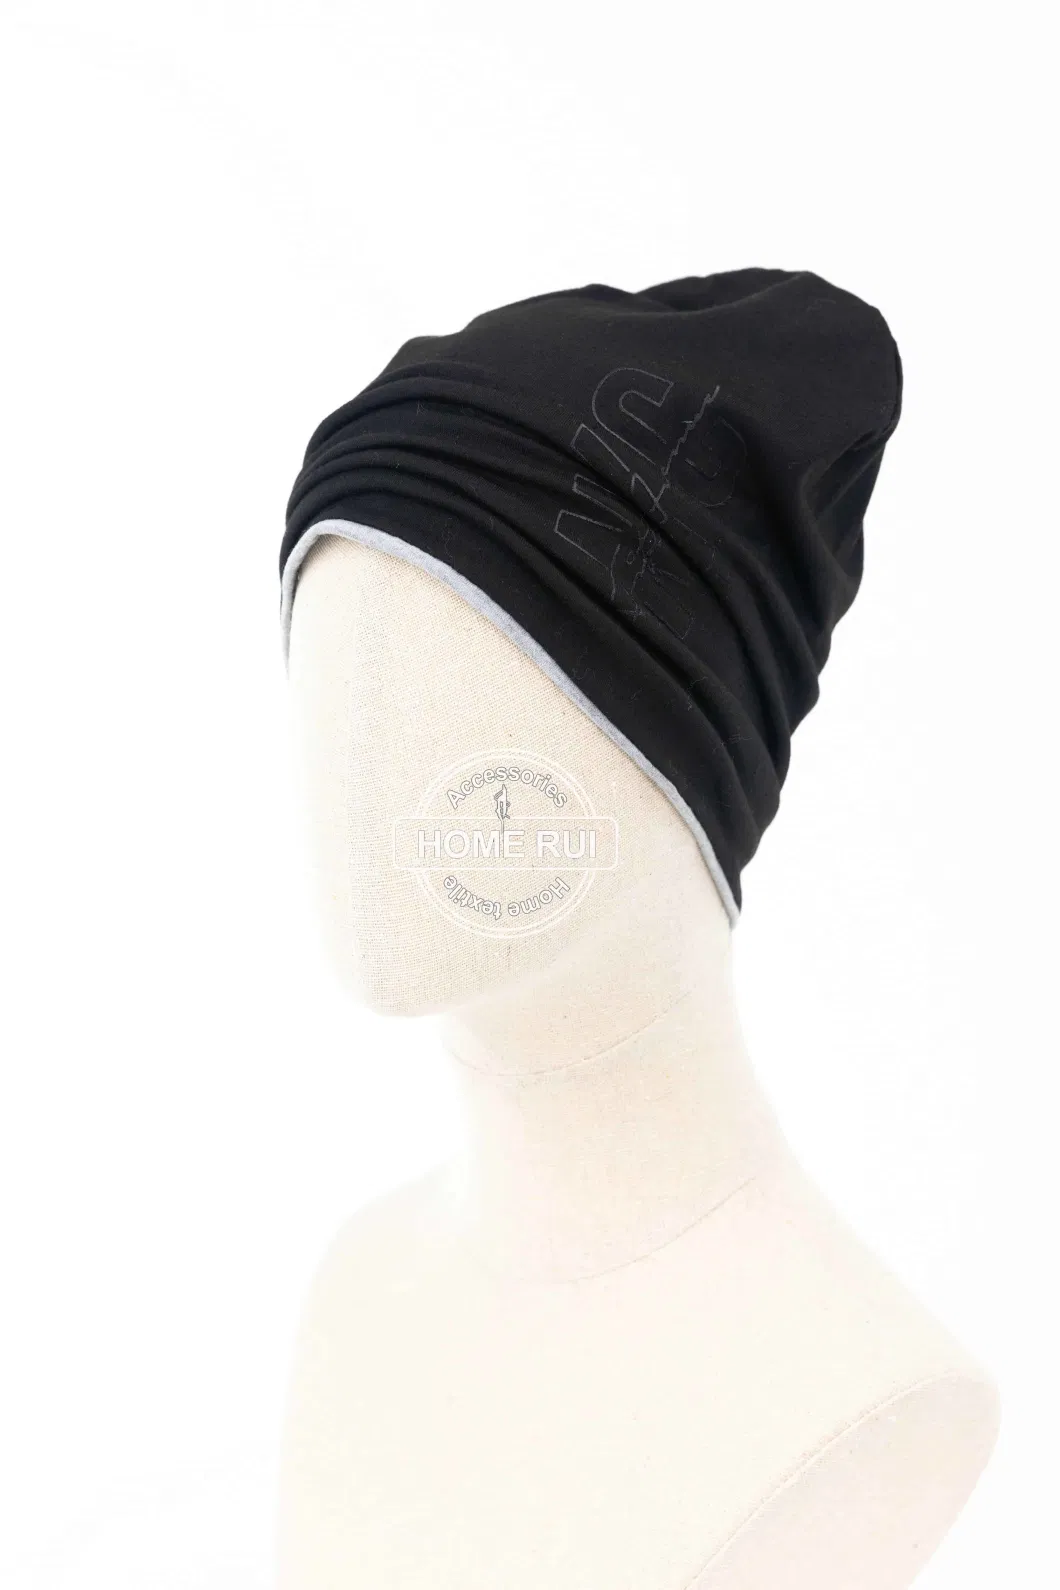 Unisex Warm Soft Knitted Polyester Print Logo Solid Plain Bonnet Casual Hat Beanie